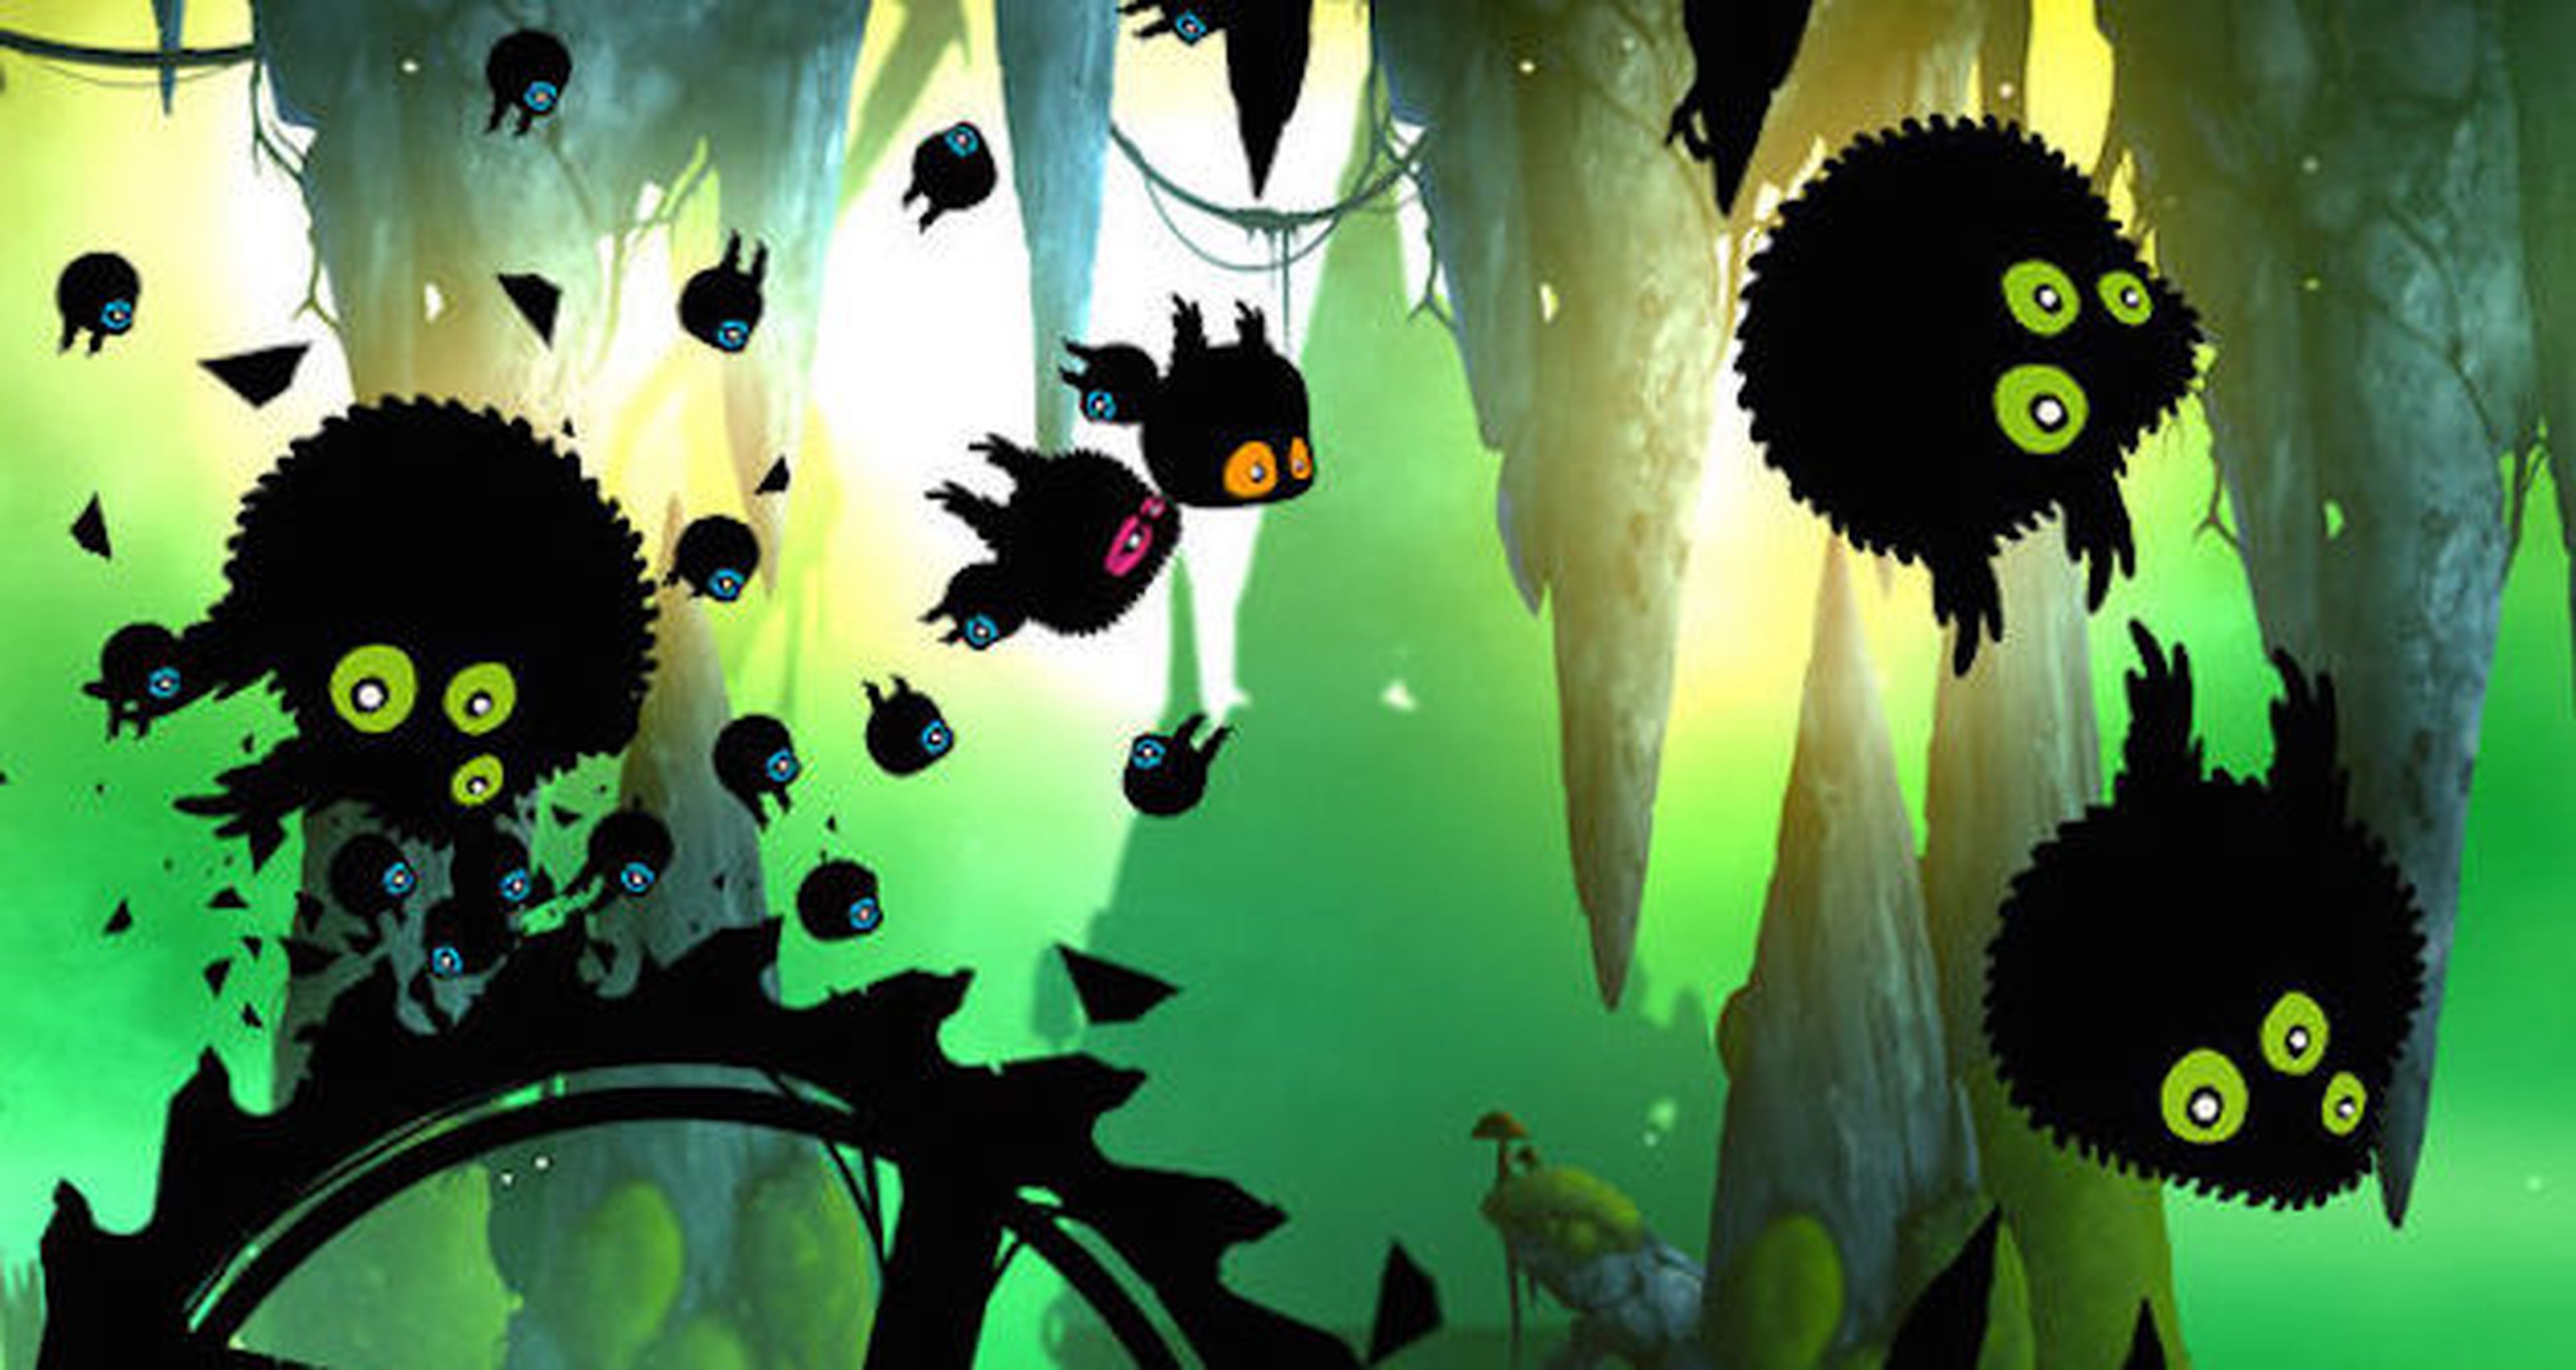 Badland: Game of the Year Edition pone rumbo a PS4, Xbox One, Wii U y PC